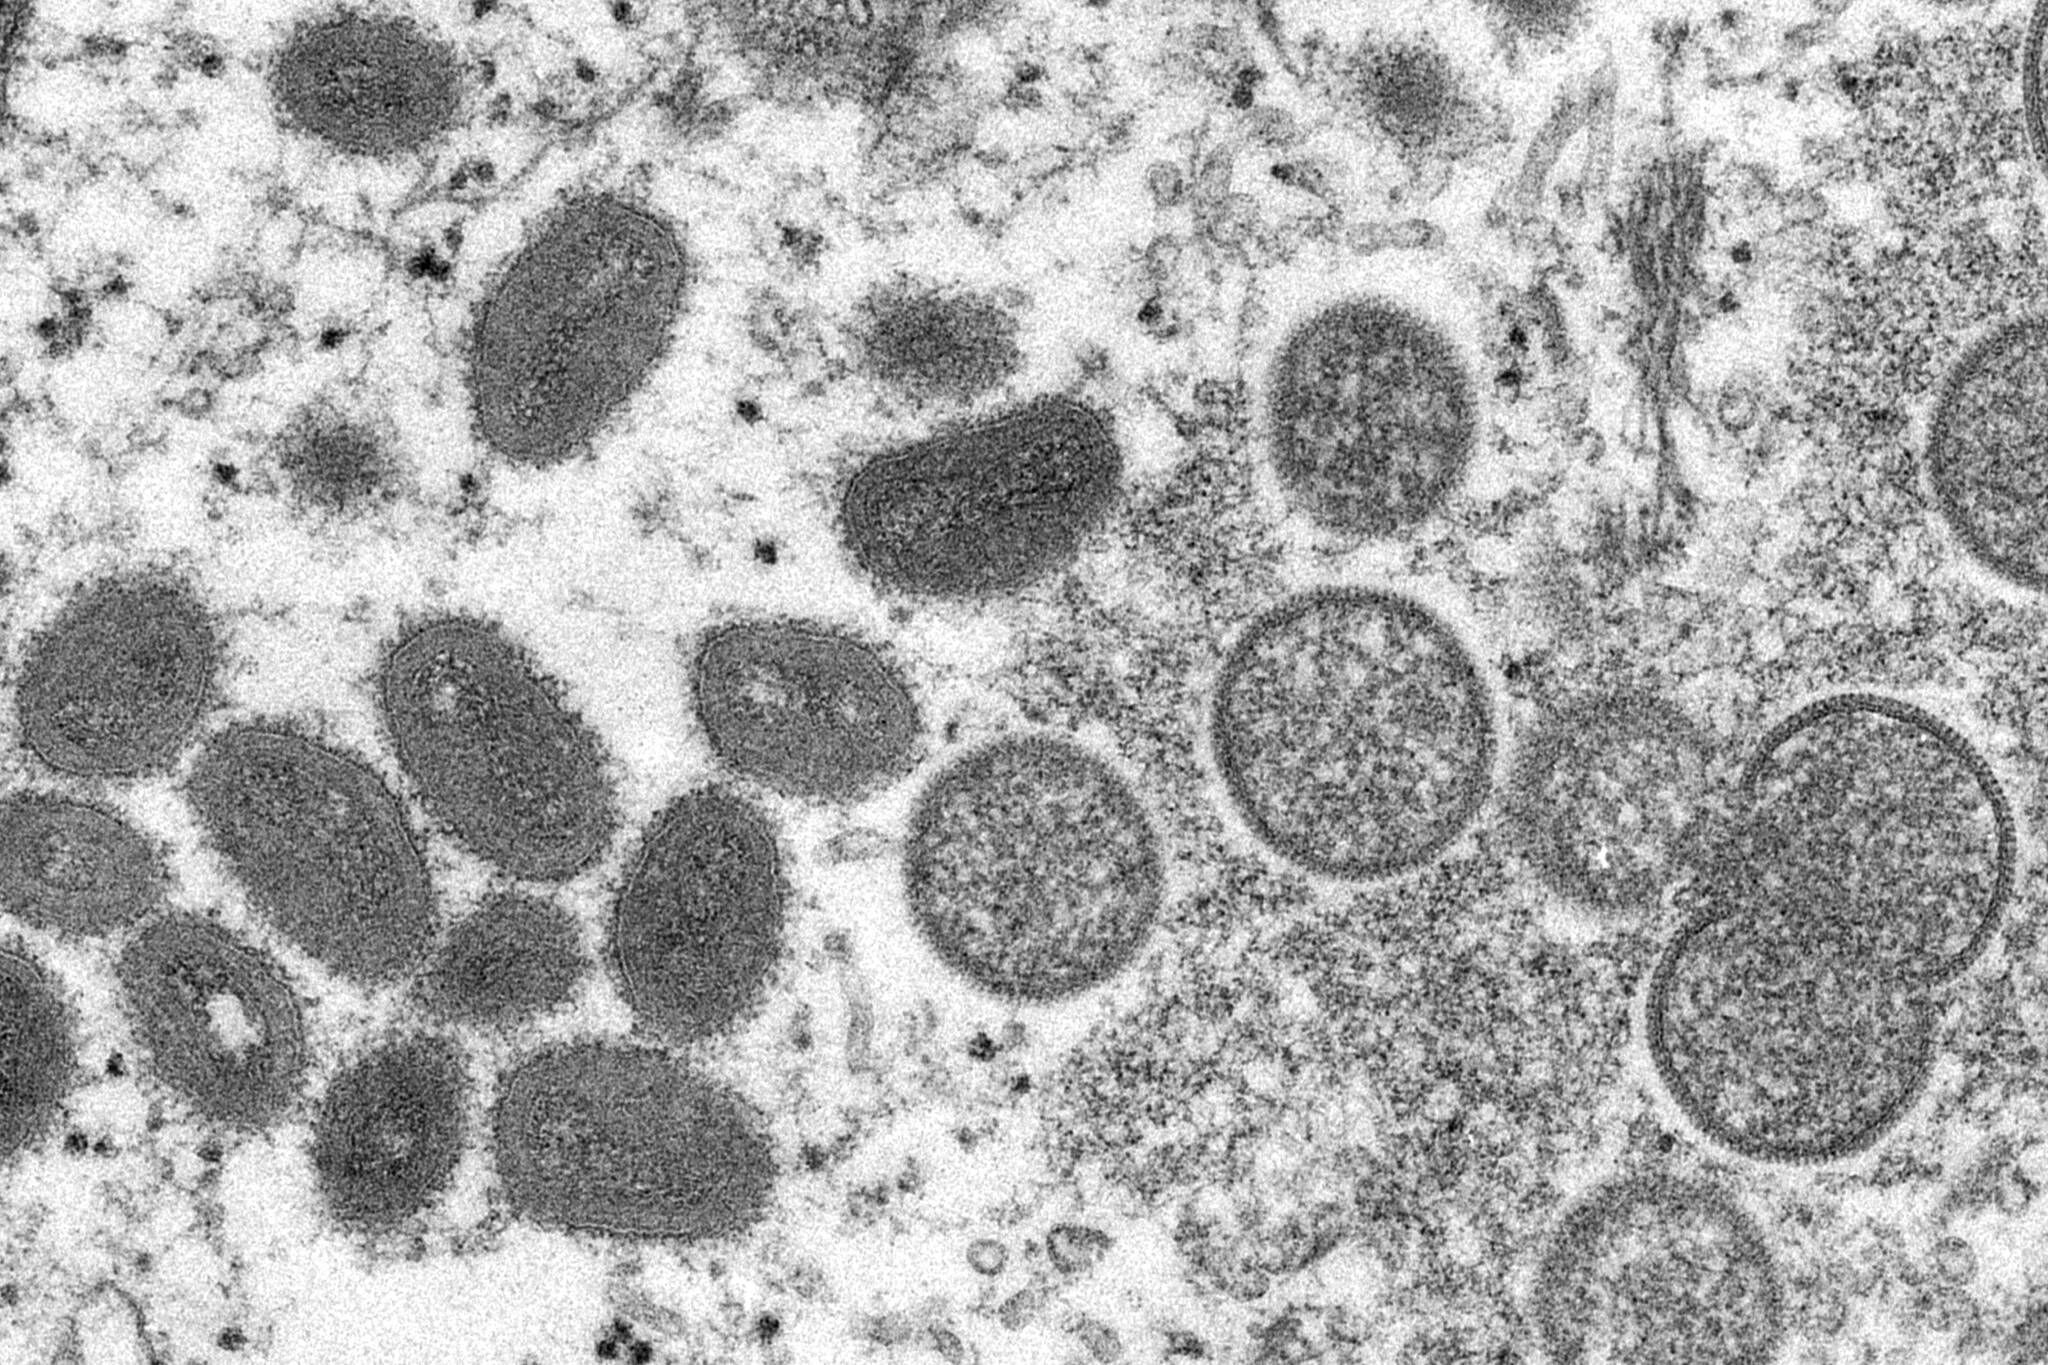 This 2003 electron microscope image made available by the Centers for Disease Control and Prevention shows mature, oval-shaped monkeypox virions, left, and spherical immature virions, right, obtained from a sample of human skin associated with the 2003 prairie dog outbreak. The spread of monkeypox in the U.S. in 2022 could represent the dawn of a new sexually transmitted disease, or it could yet be contained. Or it might be too early to tell. (Cynthia S. Goldsmith, Russell Regner/CDC via AP, File)